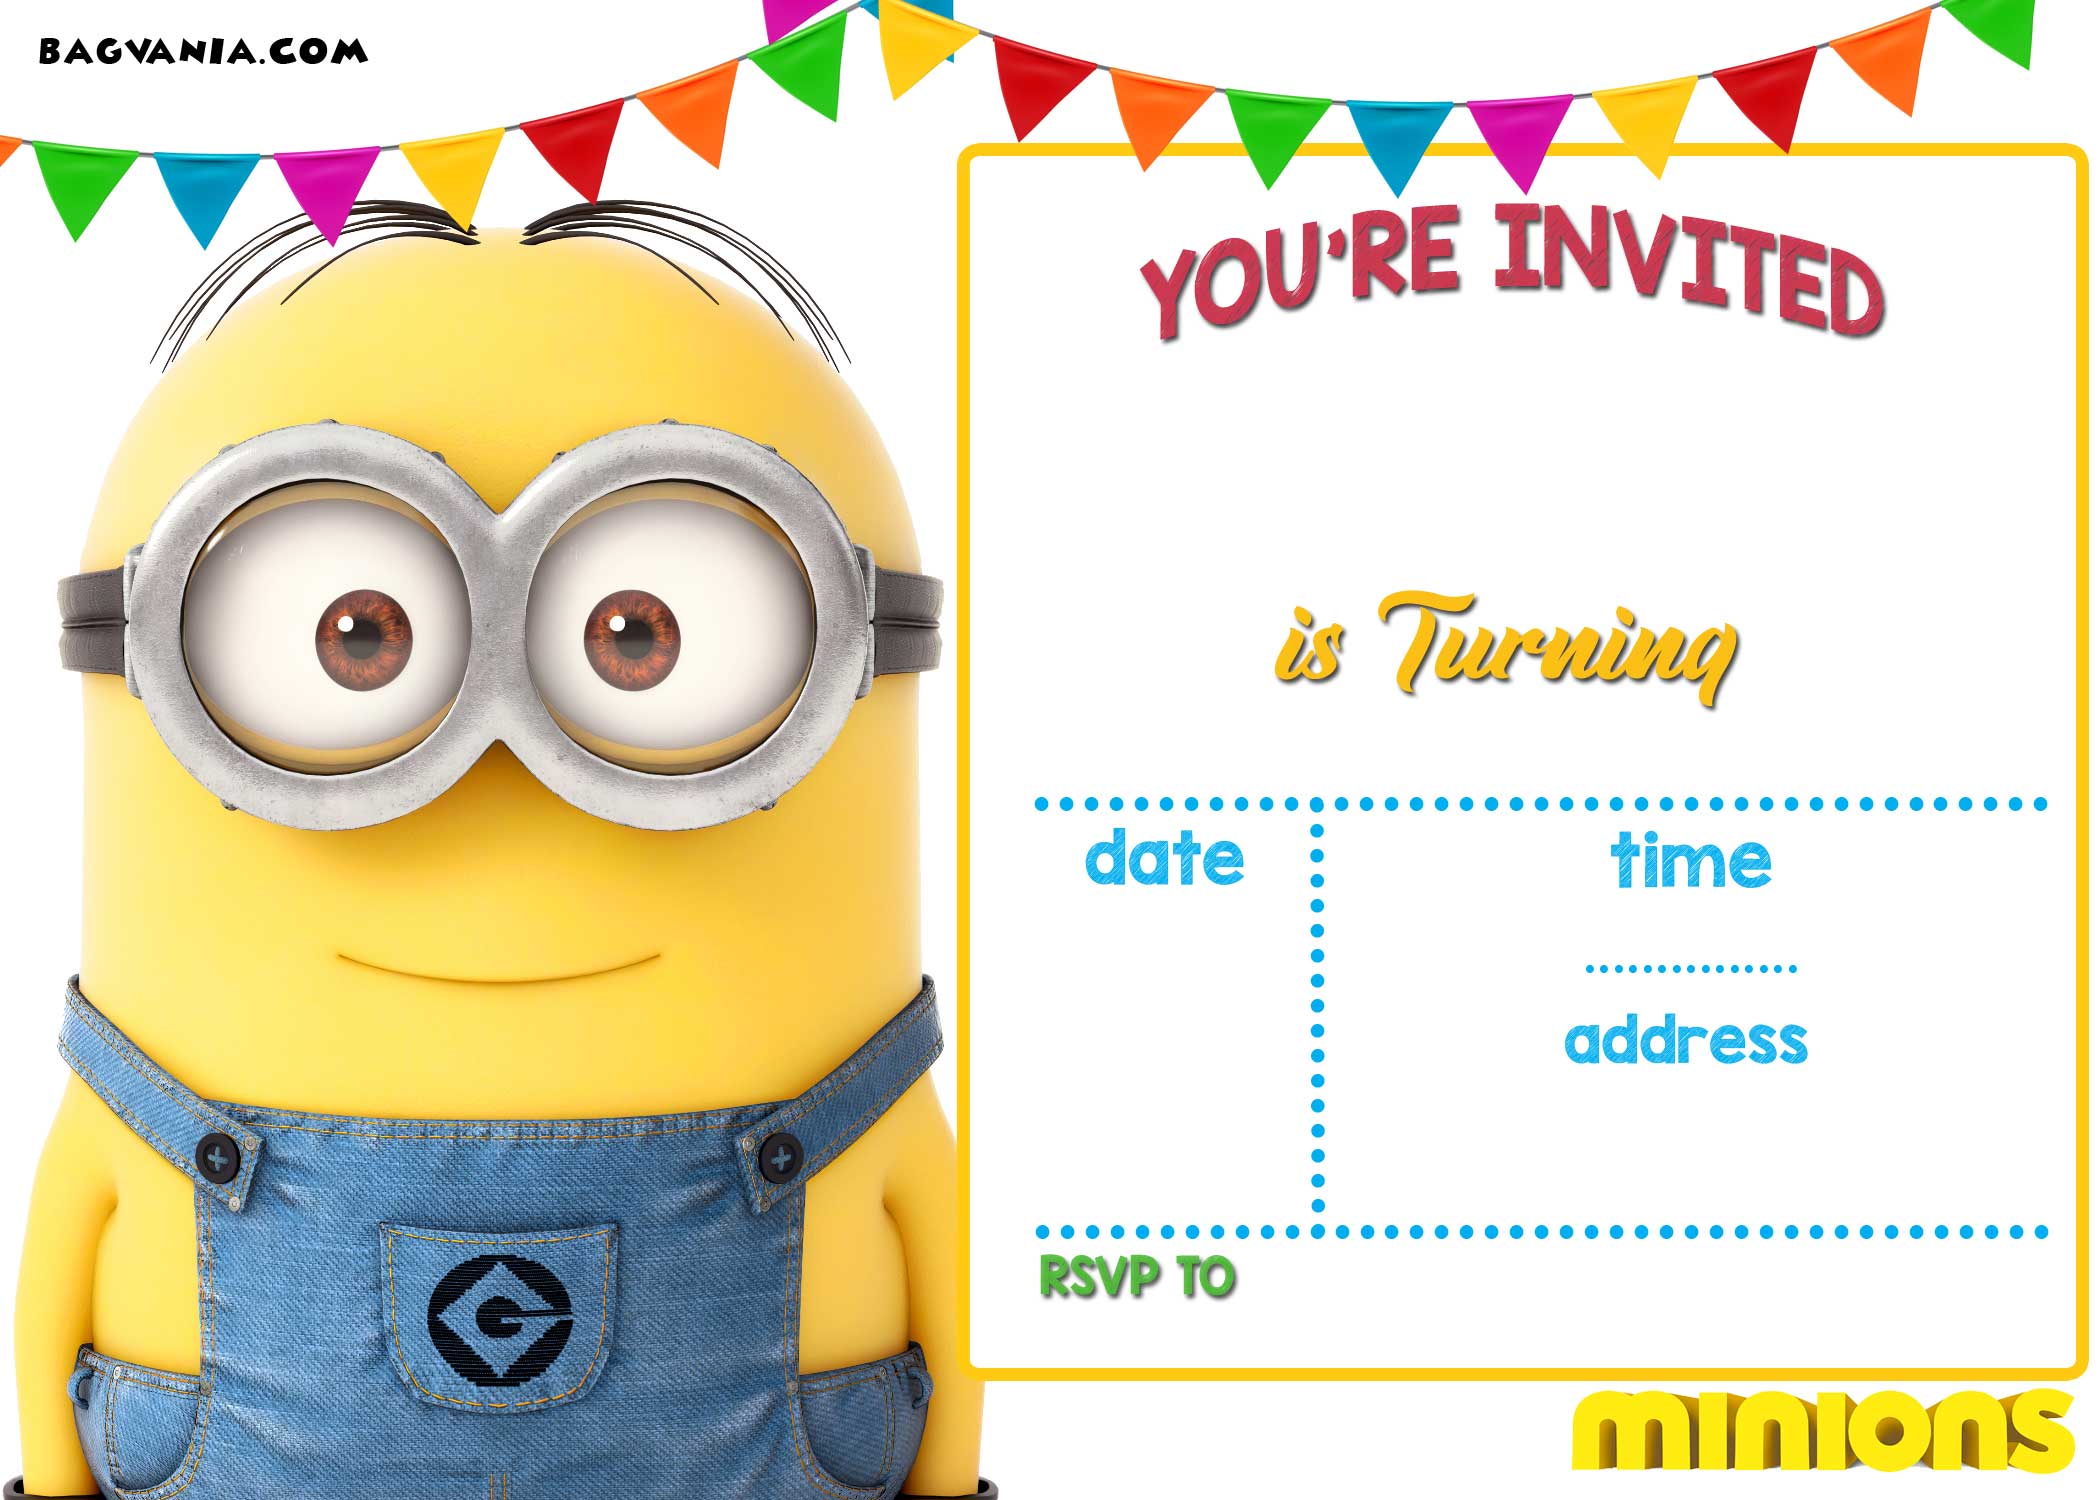 minions-party-free-printables-is-it-for-parties-is-it-free-is-it